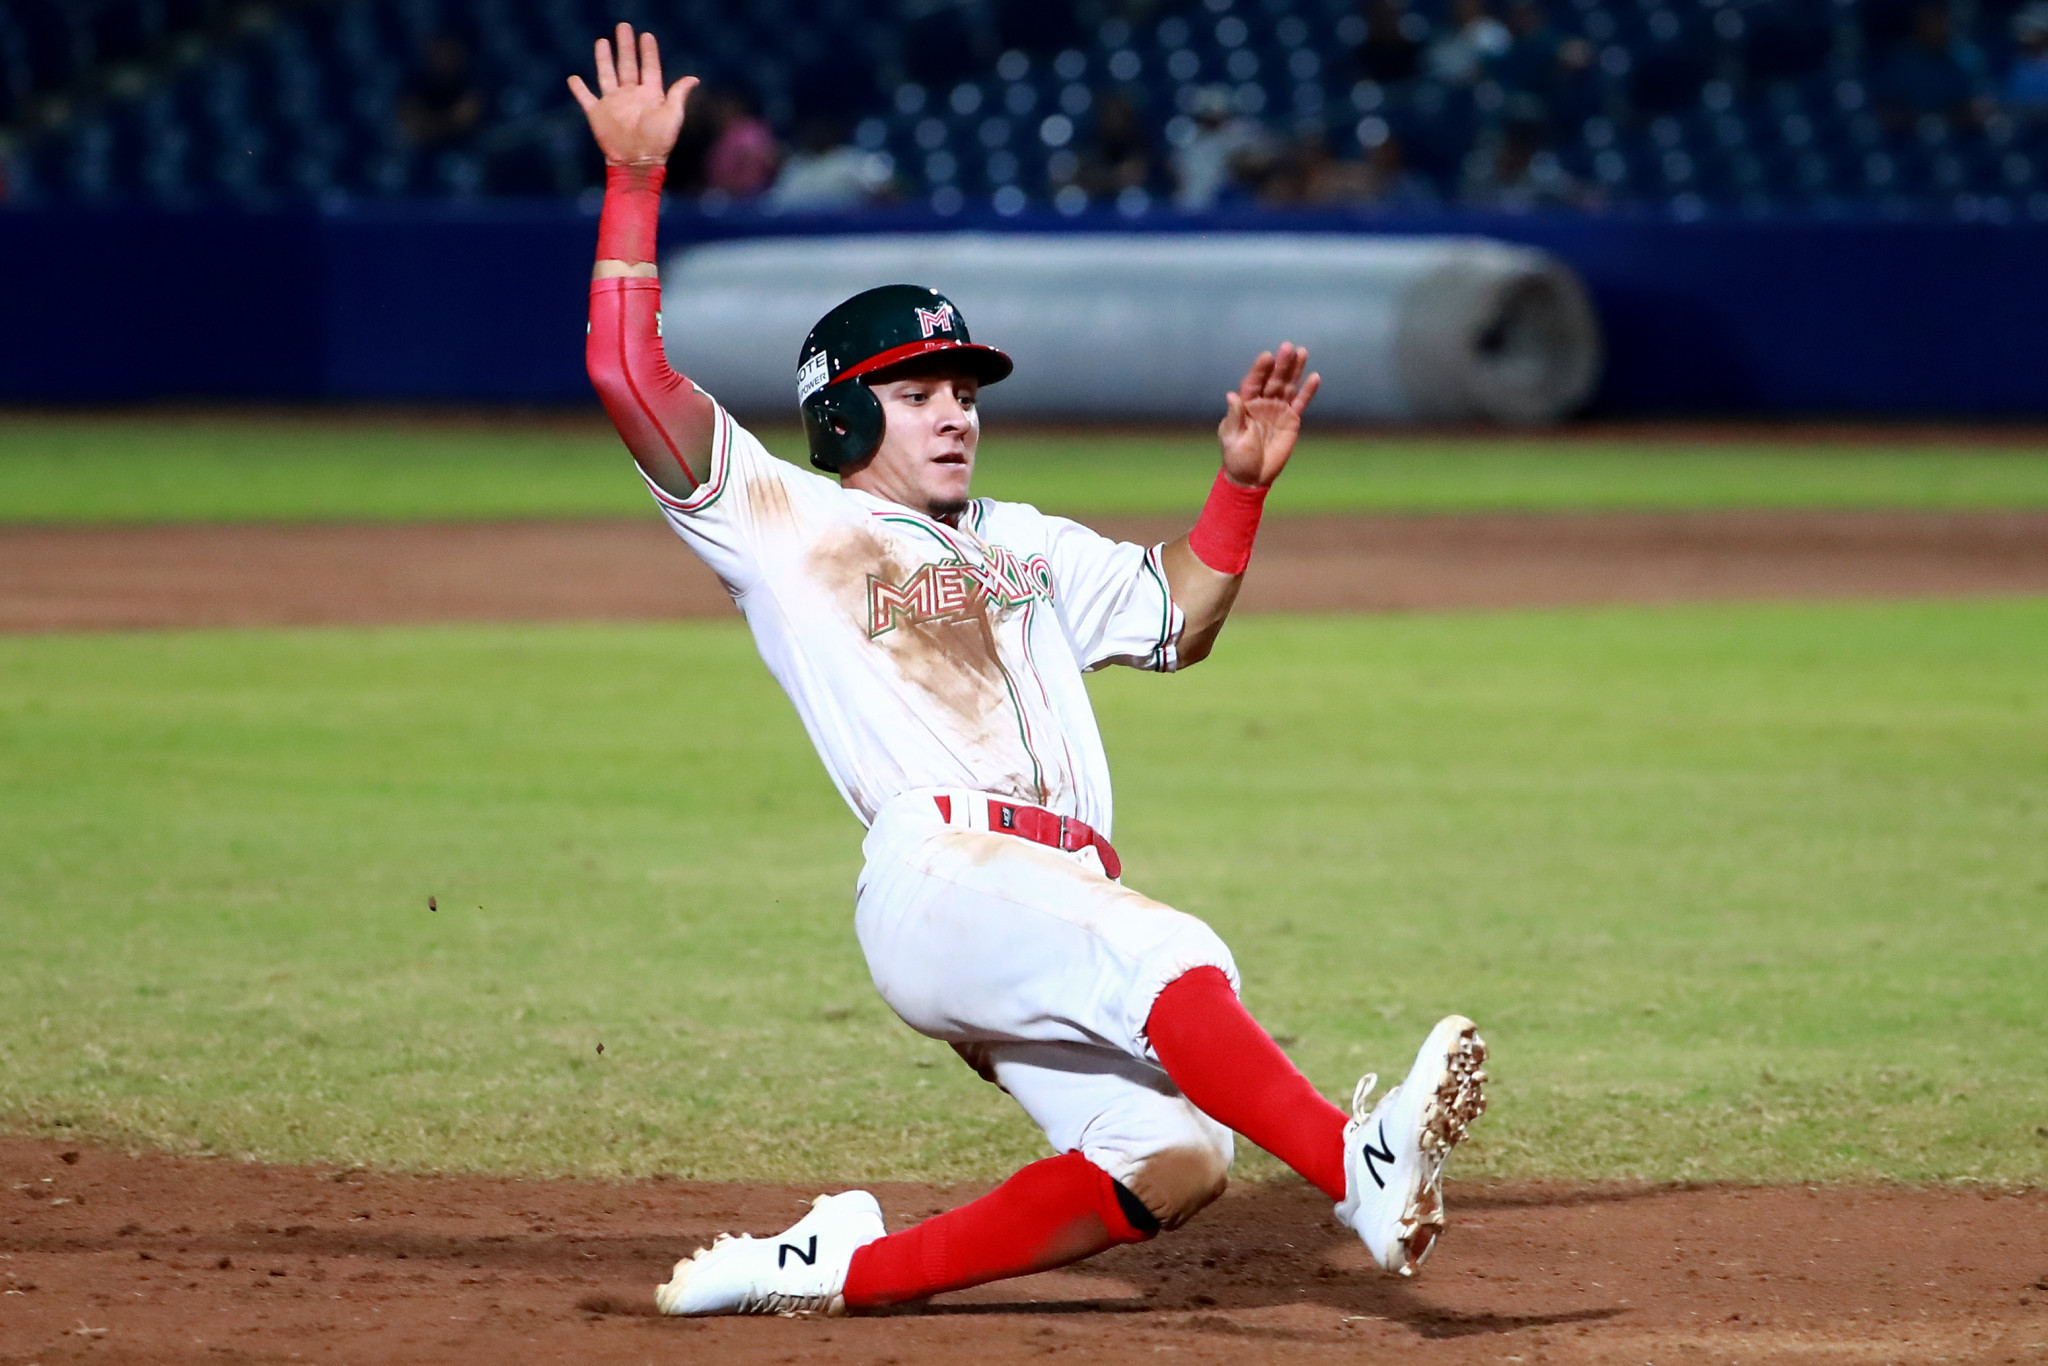 Under-23 Baseball World Cup in Mexico postponed until 2021